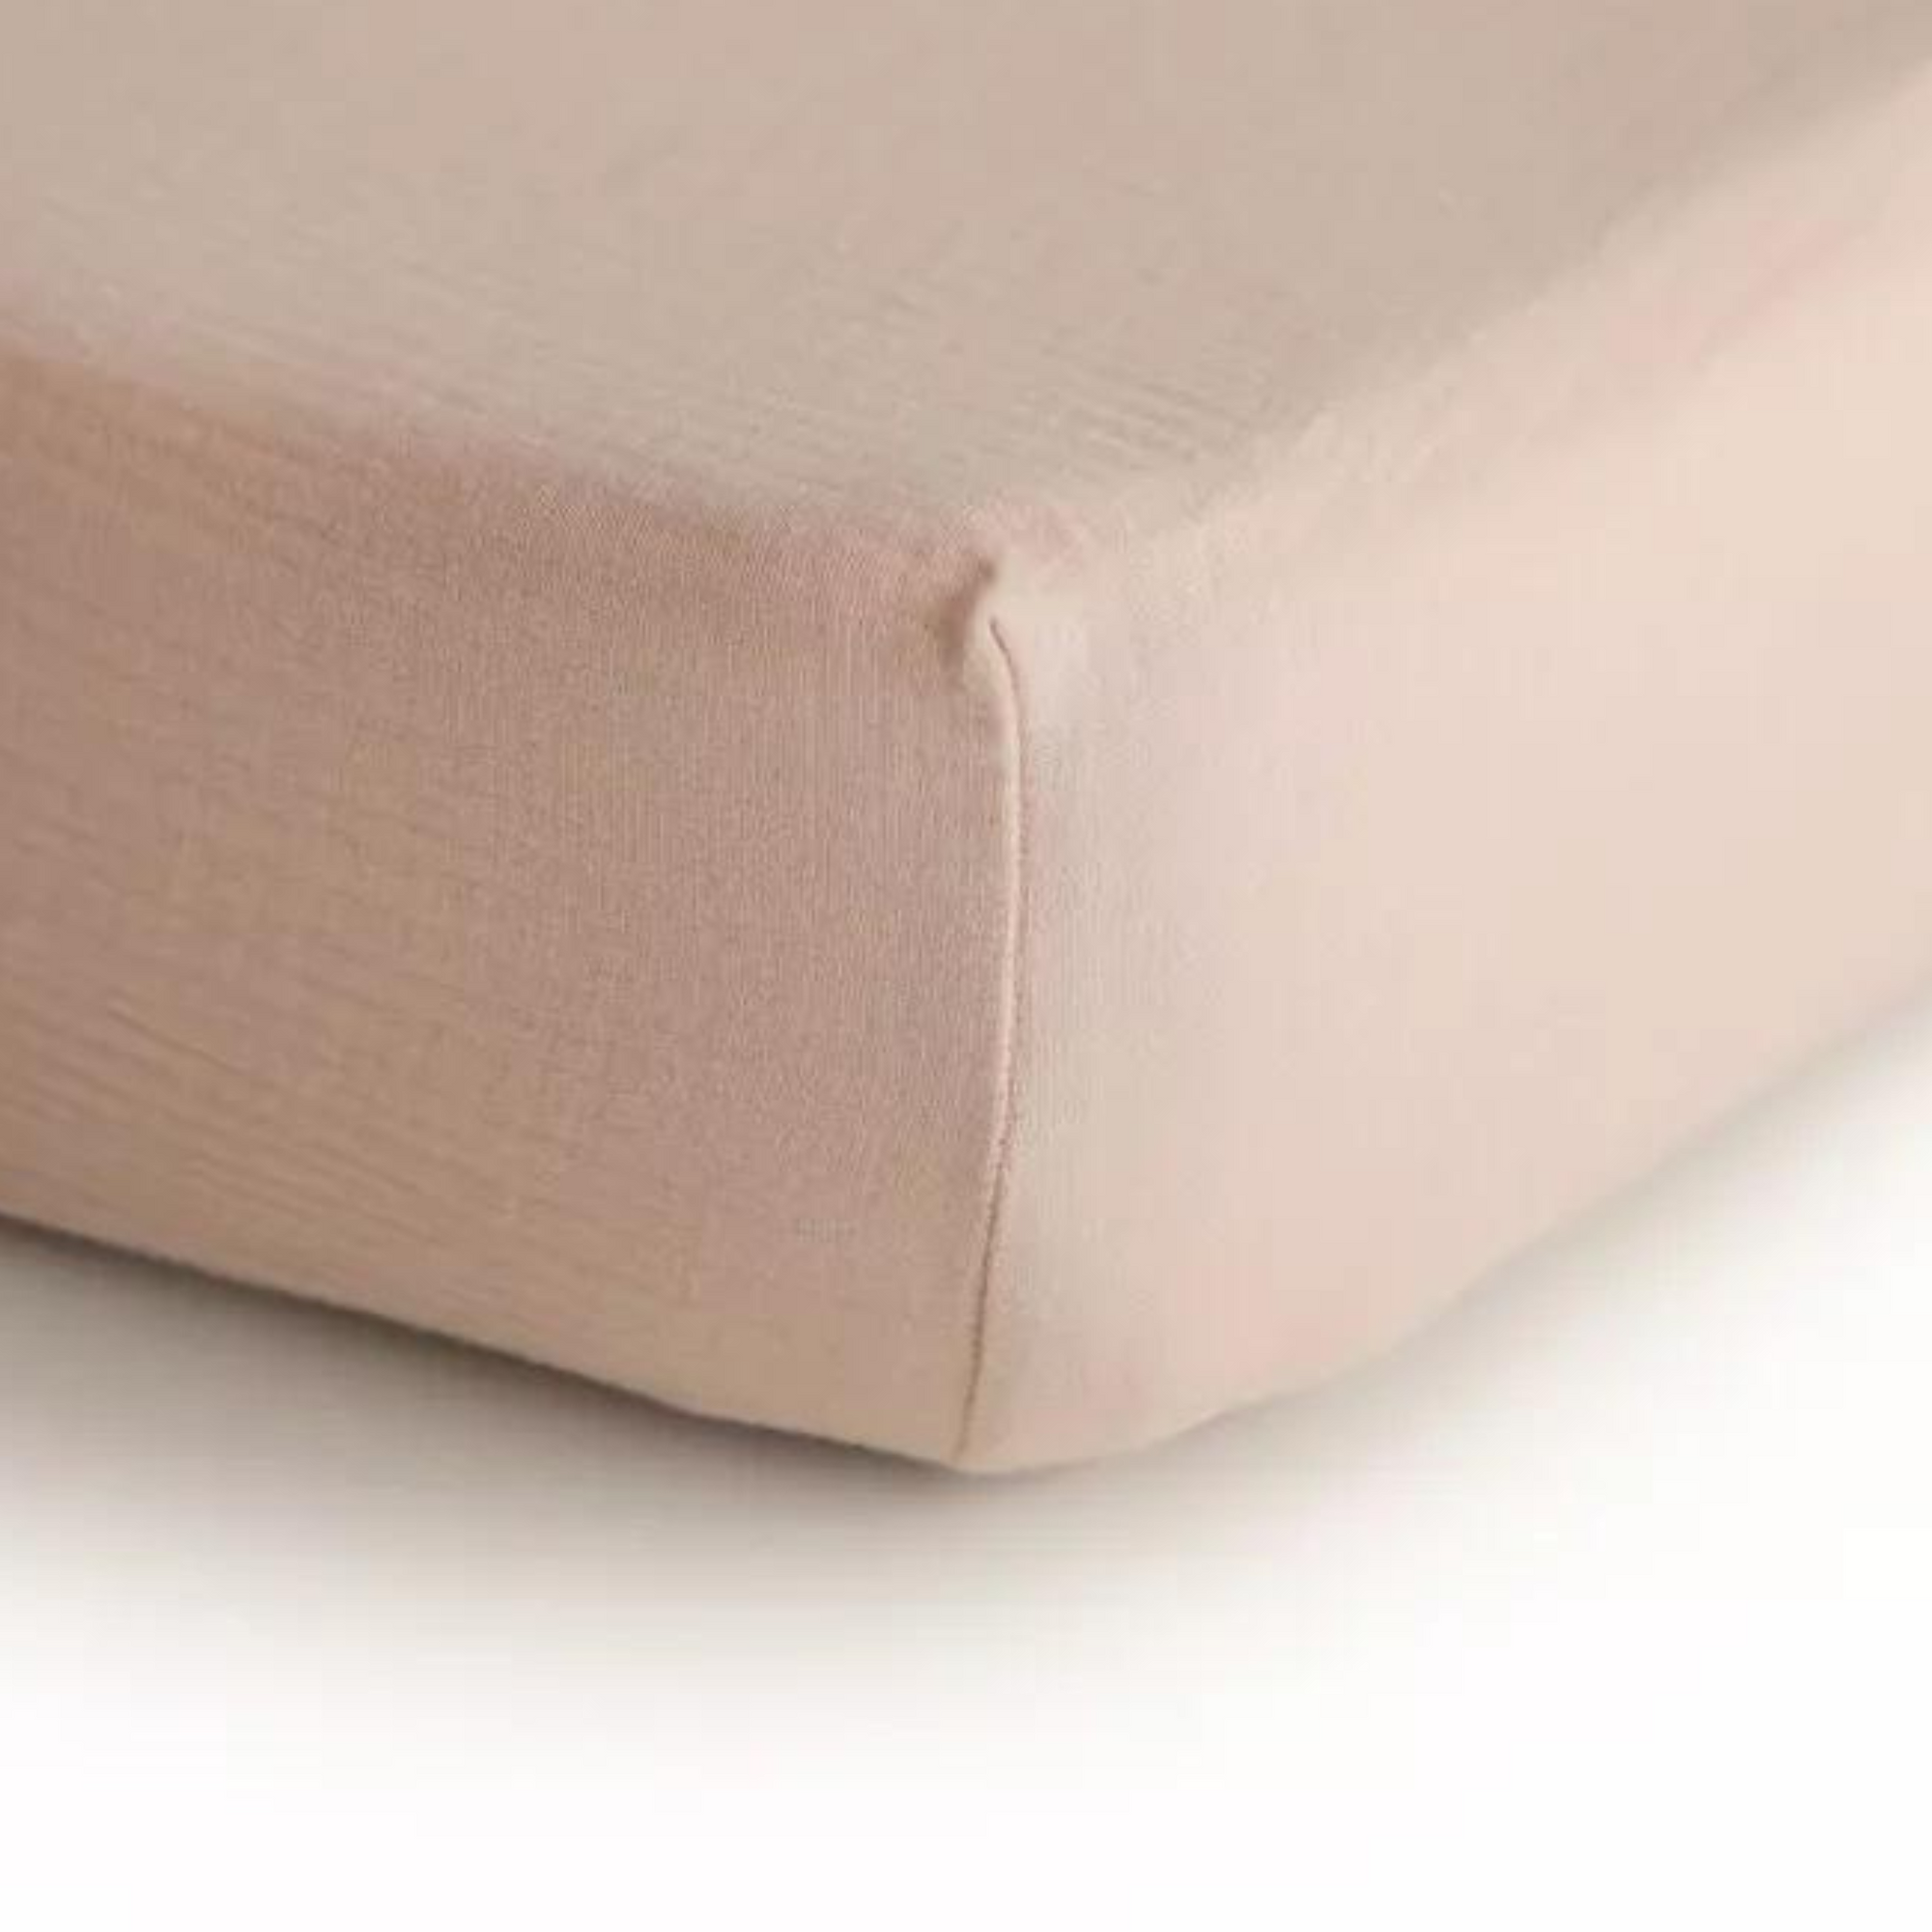 100% Organic Cotton Muslin Fitted Sheet for Flyaway Kids Bed Blush